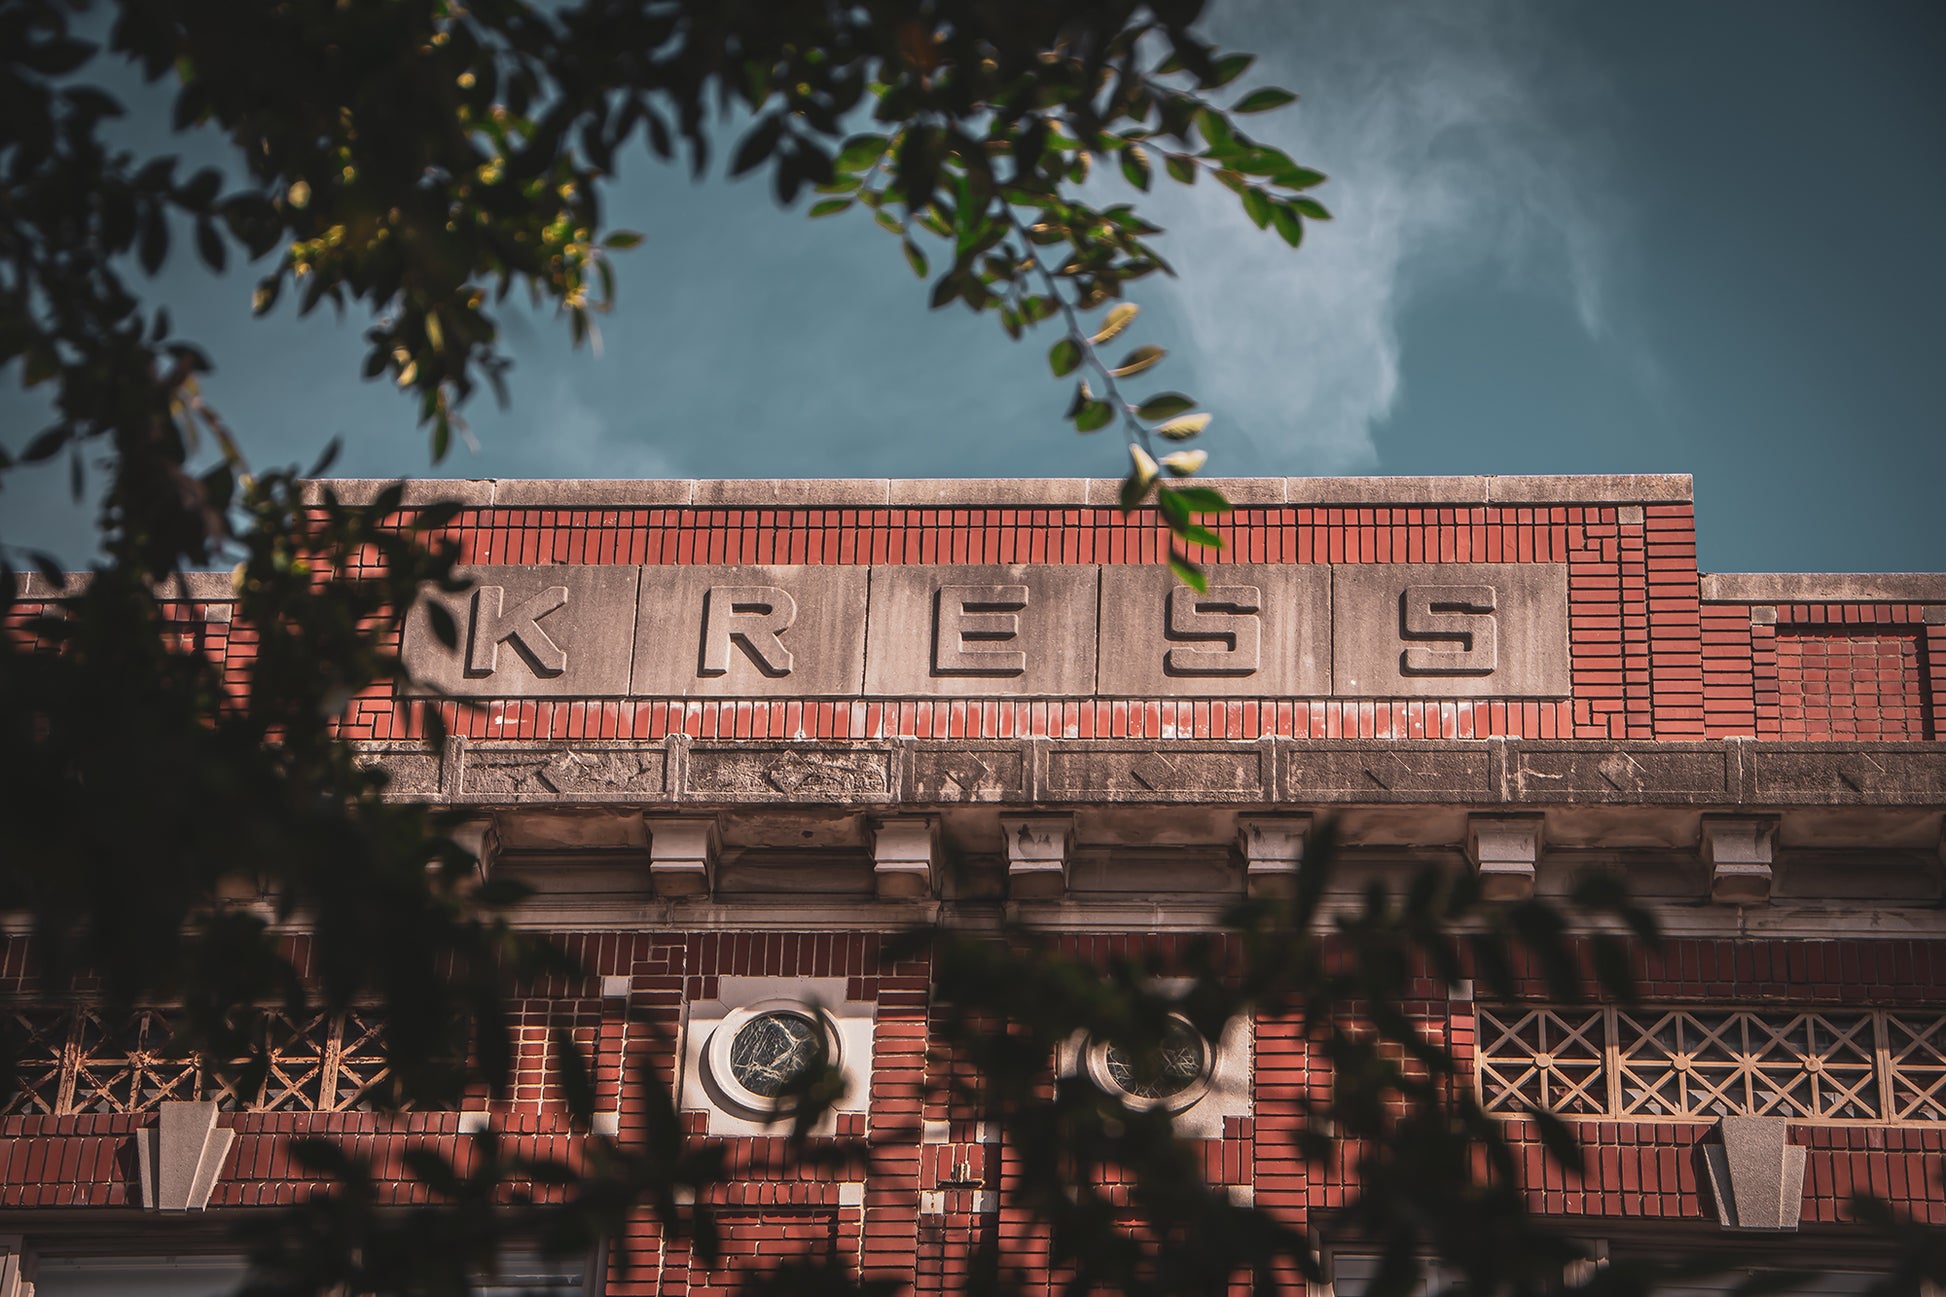 Architectural / Industrial / Cityscape Abstract Decor Old Kress Building Broughton St Savannah Ga Loose Wall Art Print 